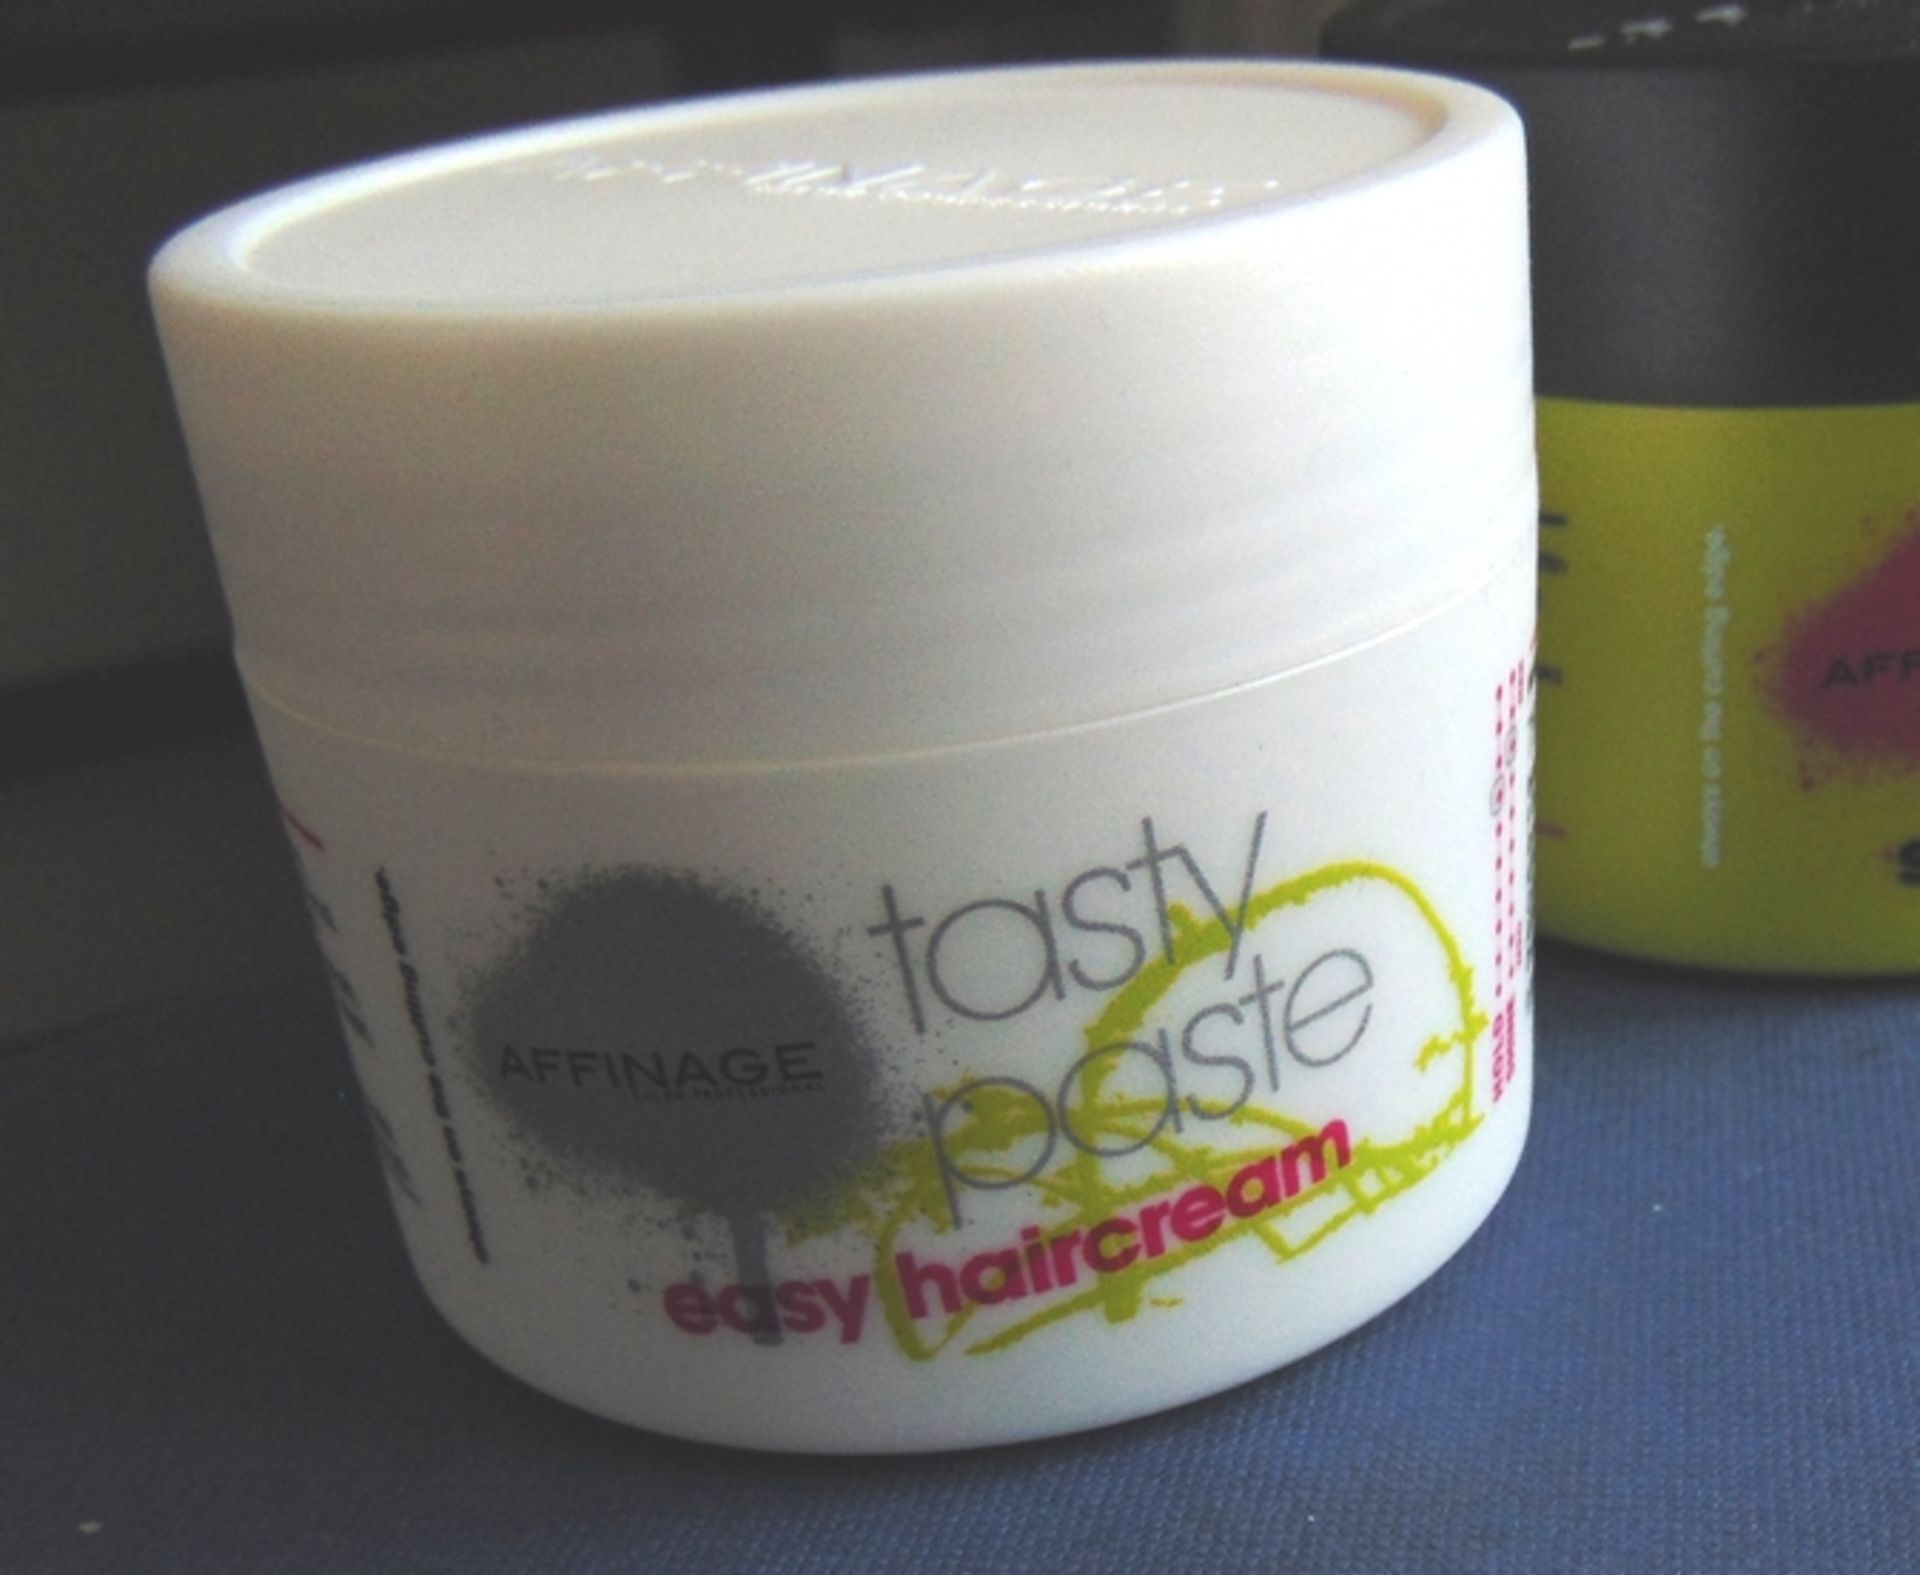 18Mixed Hair Creams, 6 S Affinage Shamrock Styling Hairpaste, - Image 4 of 4